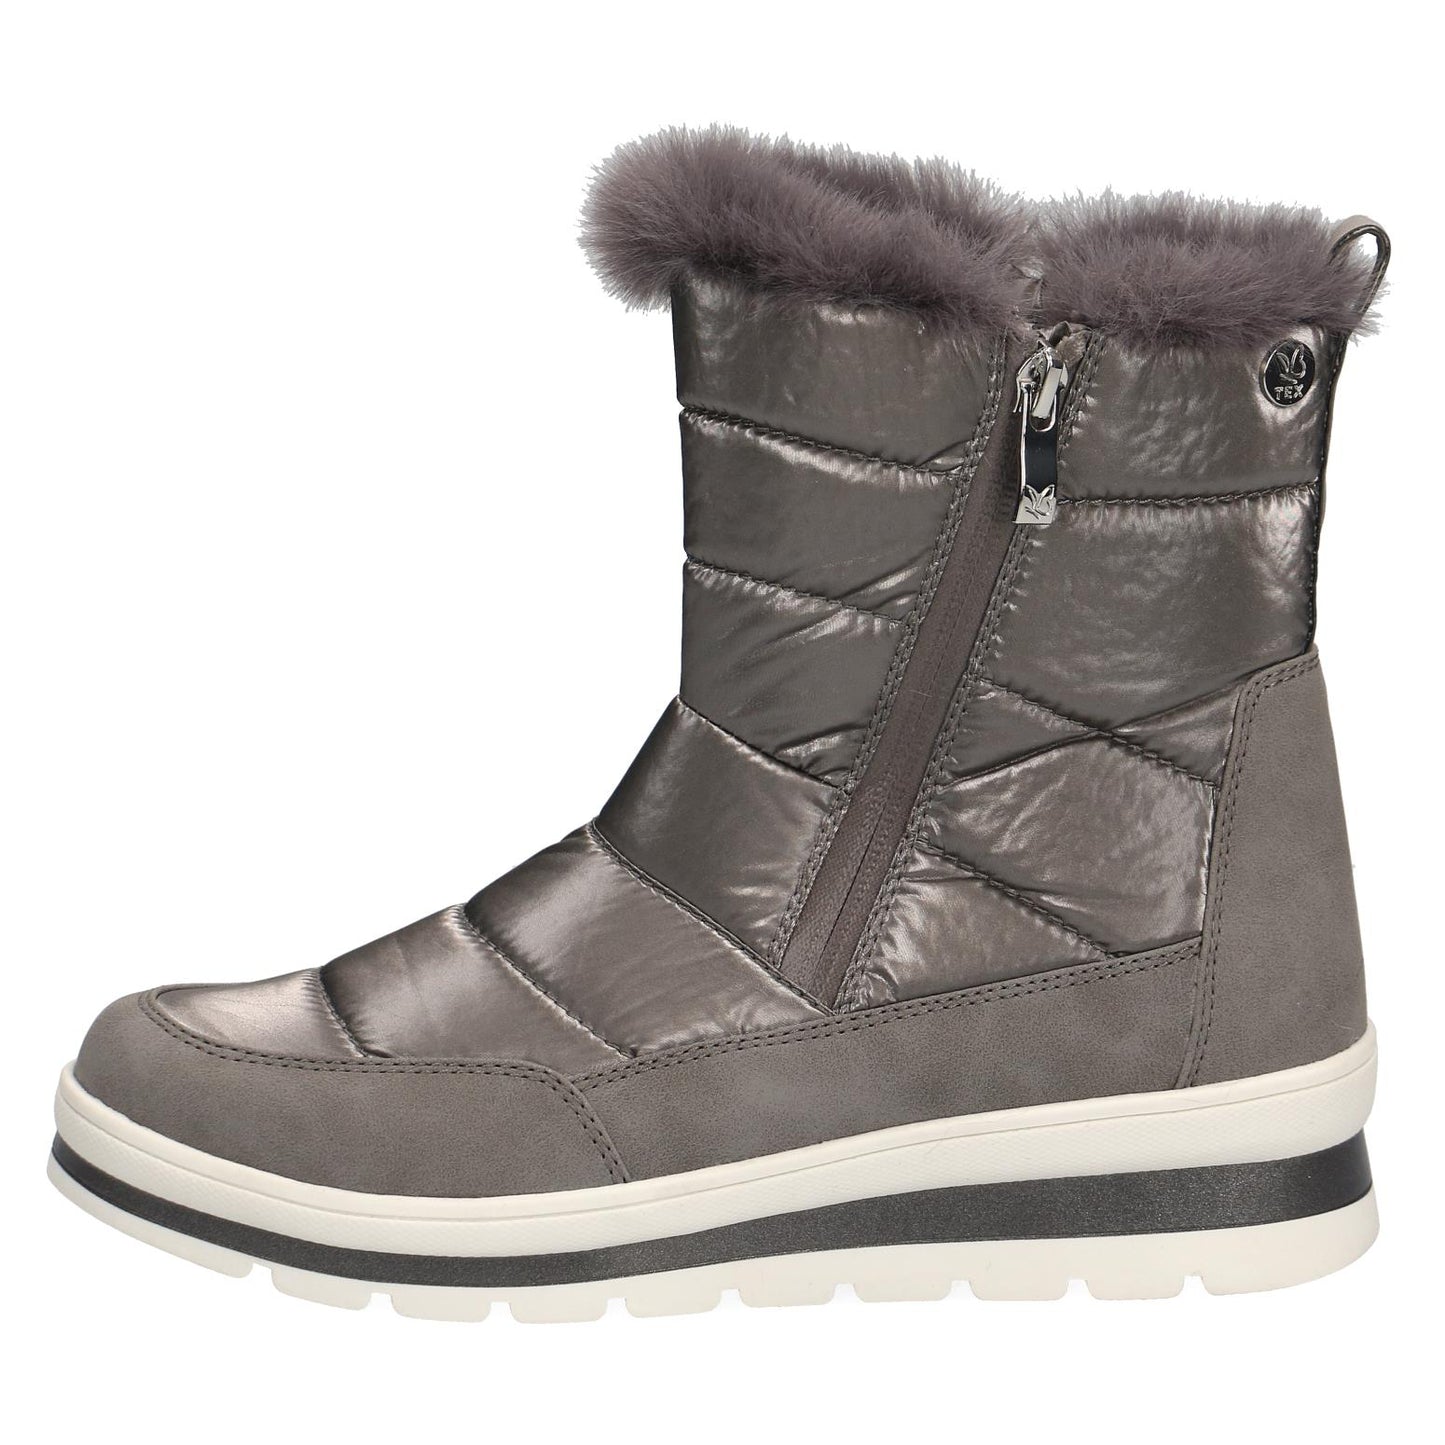 Caprice Holy 26433-29 Womens Snow Boots